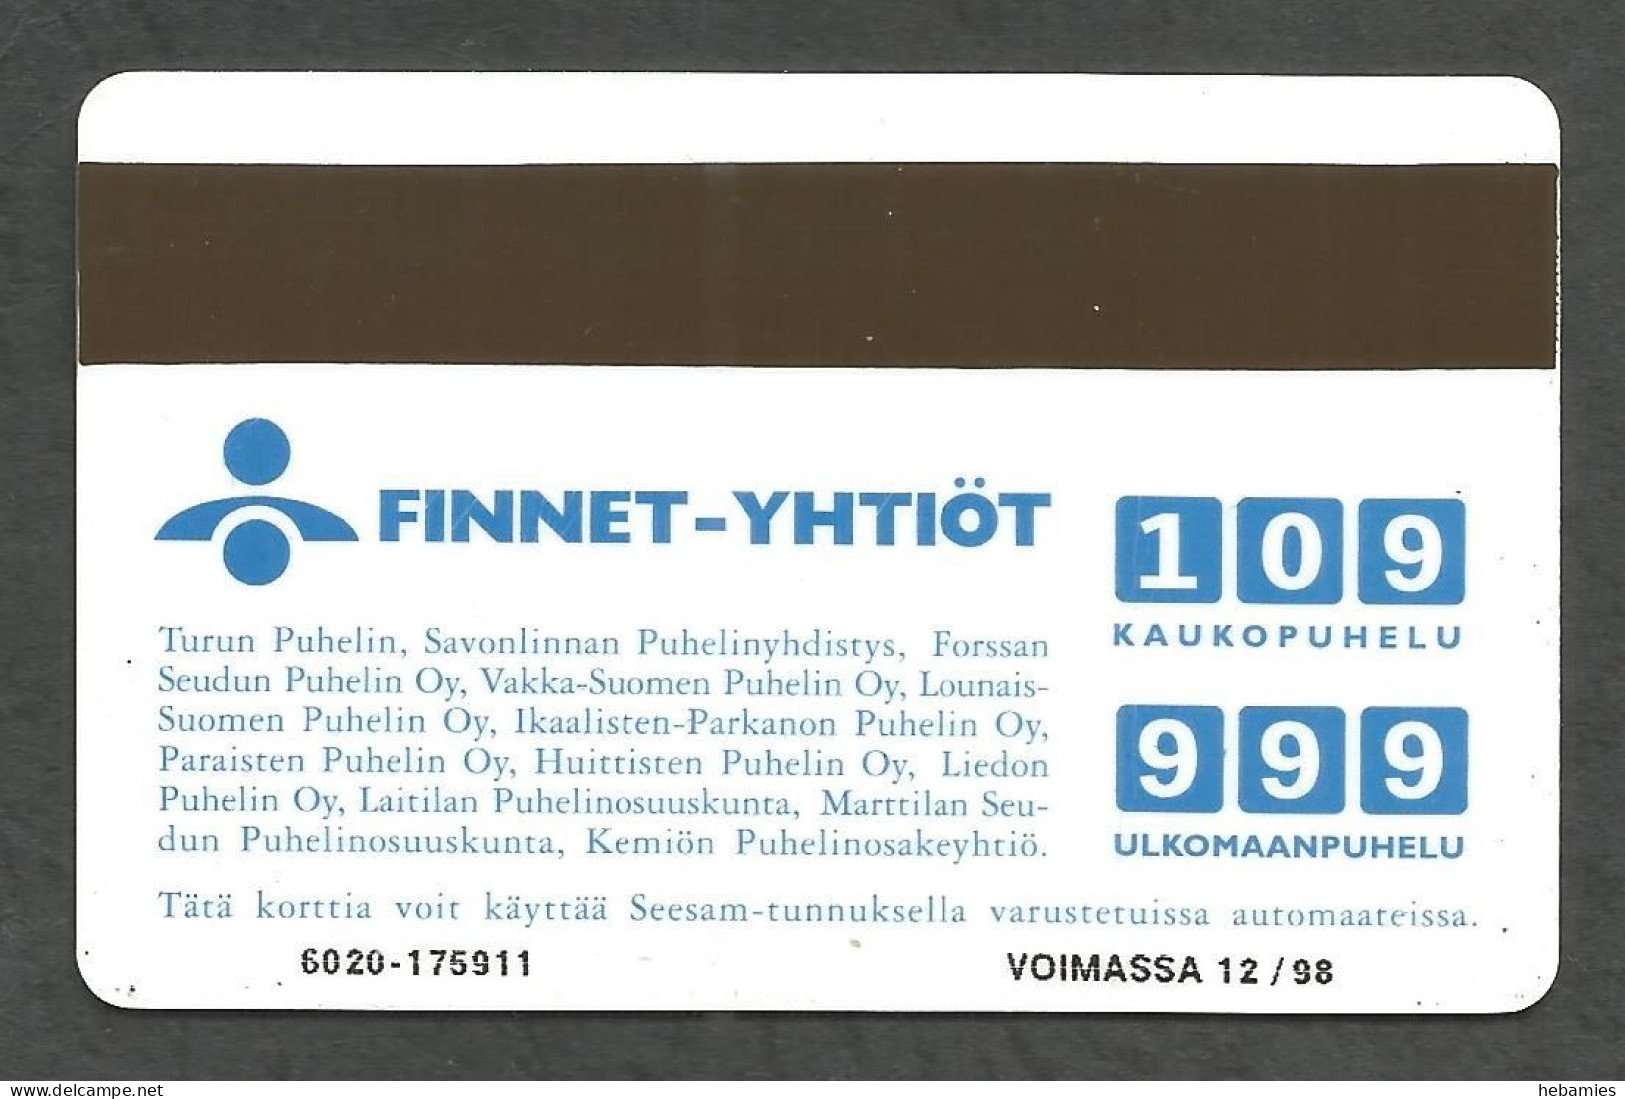 DOWN By The LAITURI MUSIC FESTIVAL - 10 FIM  1997  - Magnetic Card - D298 - FINLAND - - Finland